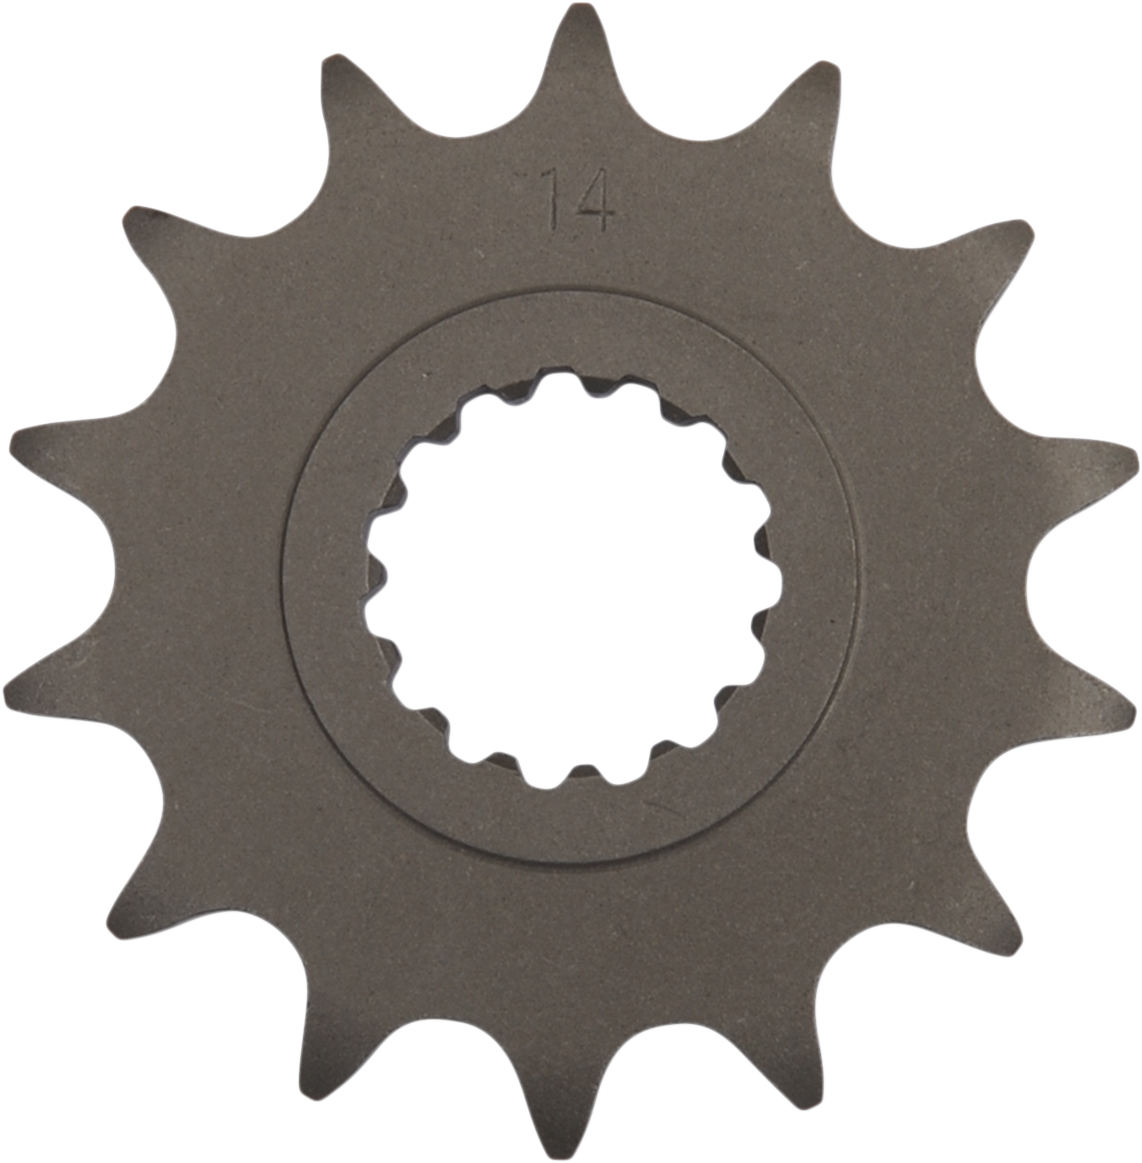 Parts Unlimited Countershaft Sprocket - 14-Tooth 9383g142310014